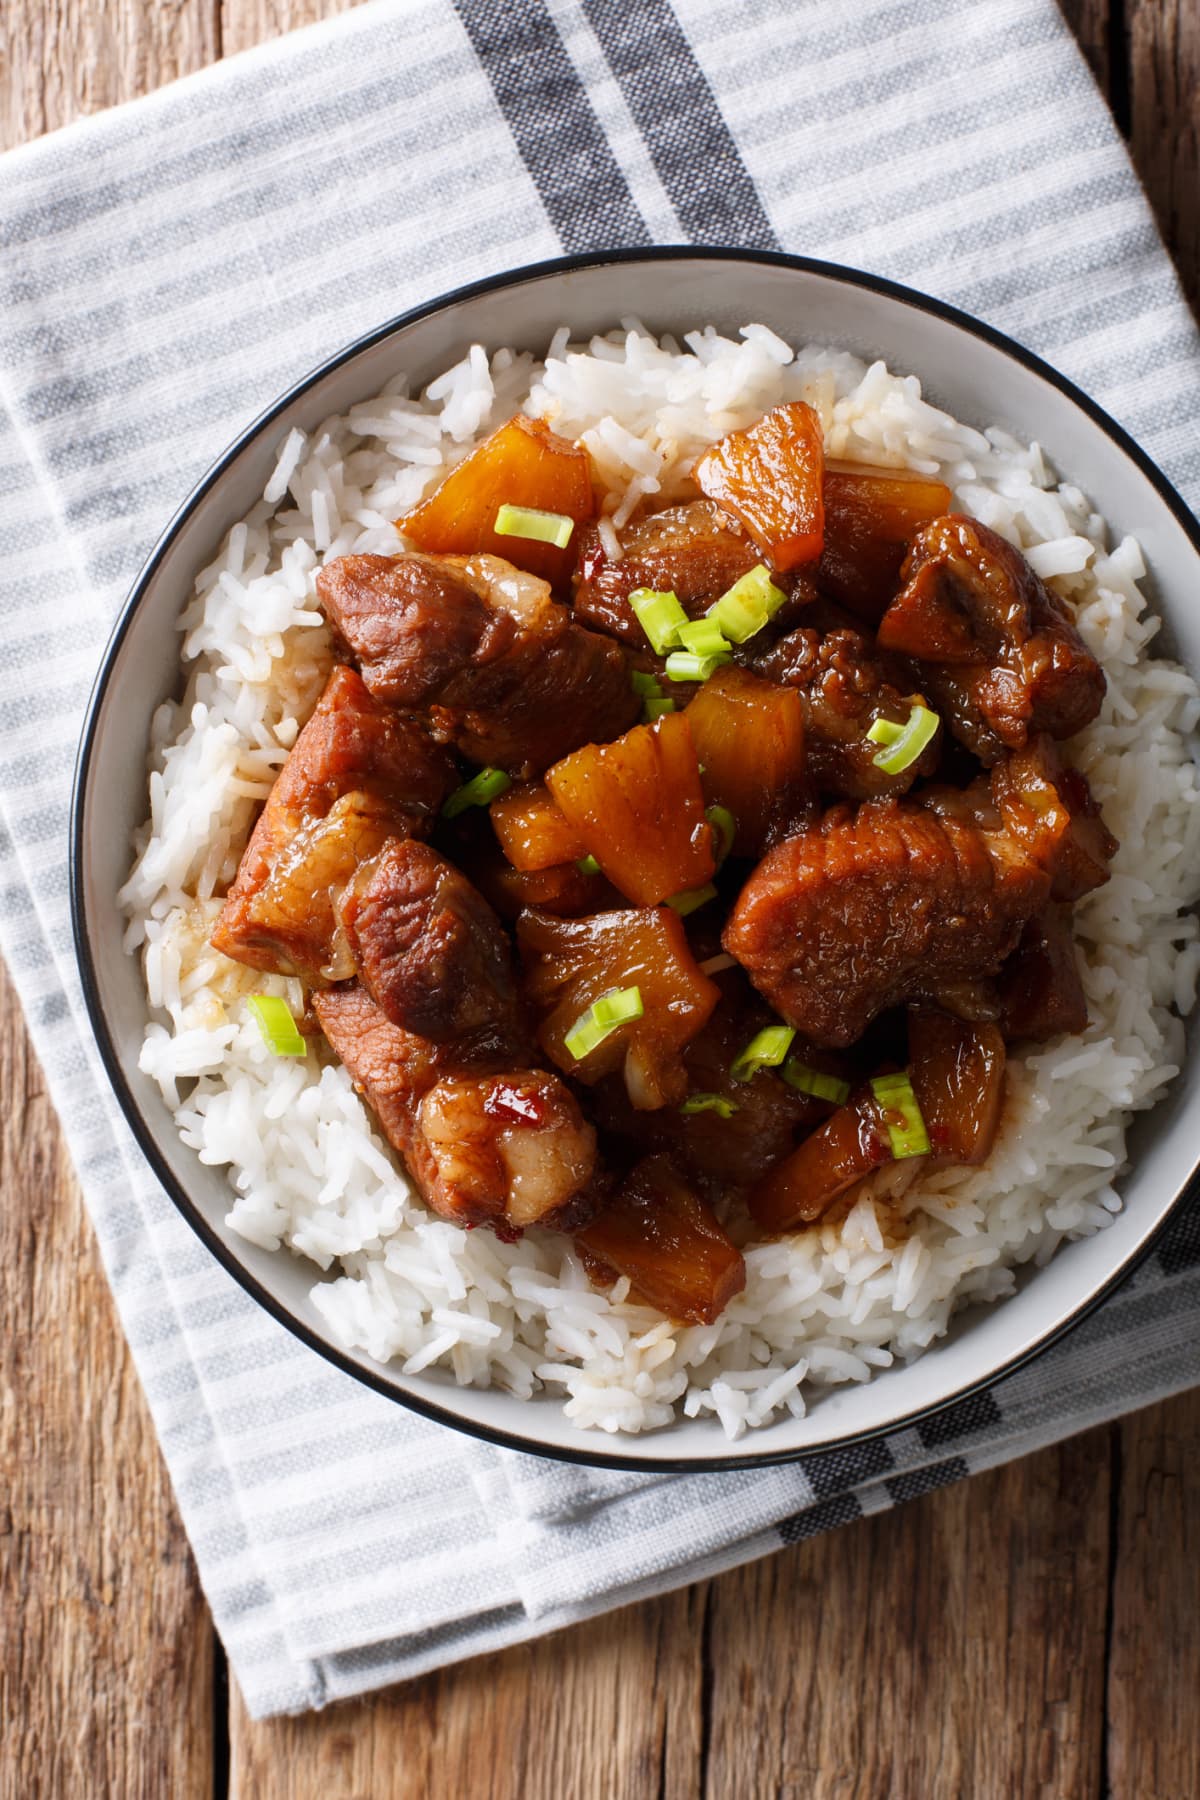 A close-up view of pork adobo with brown rice gourmet